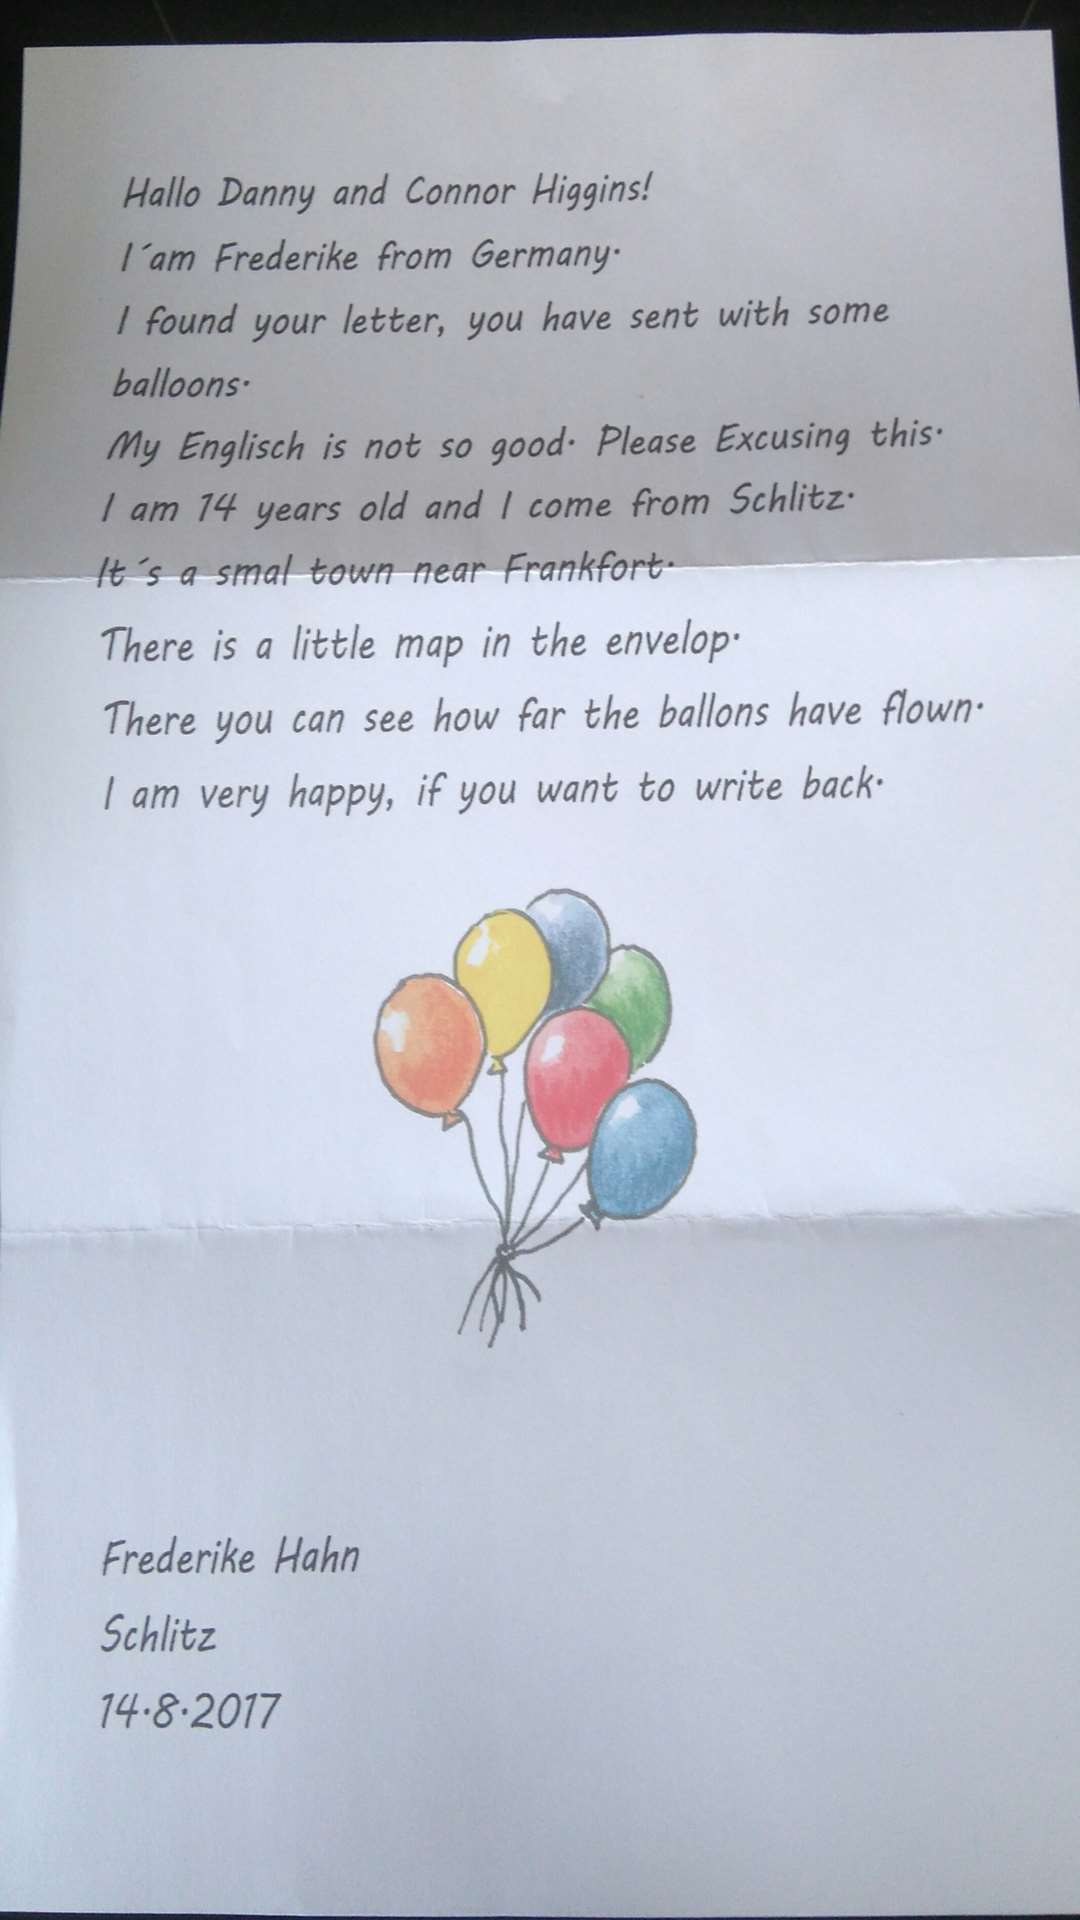 The letter the boys received from Frederike